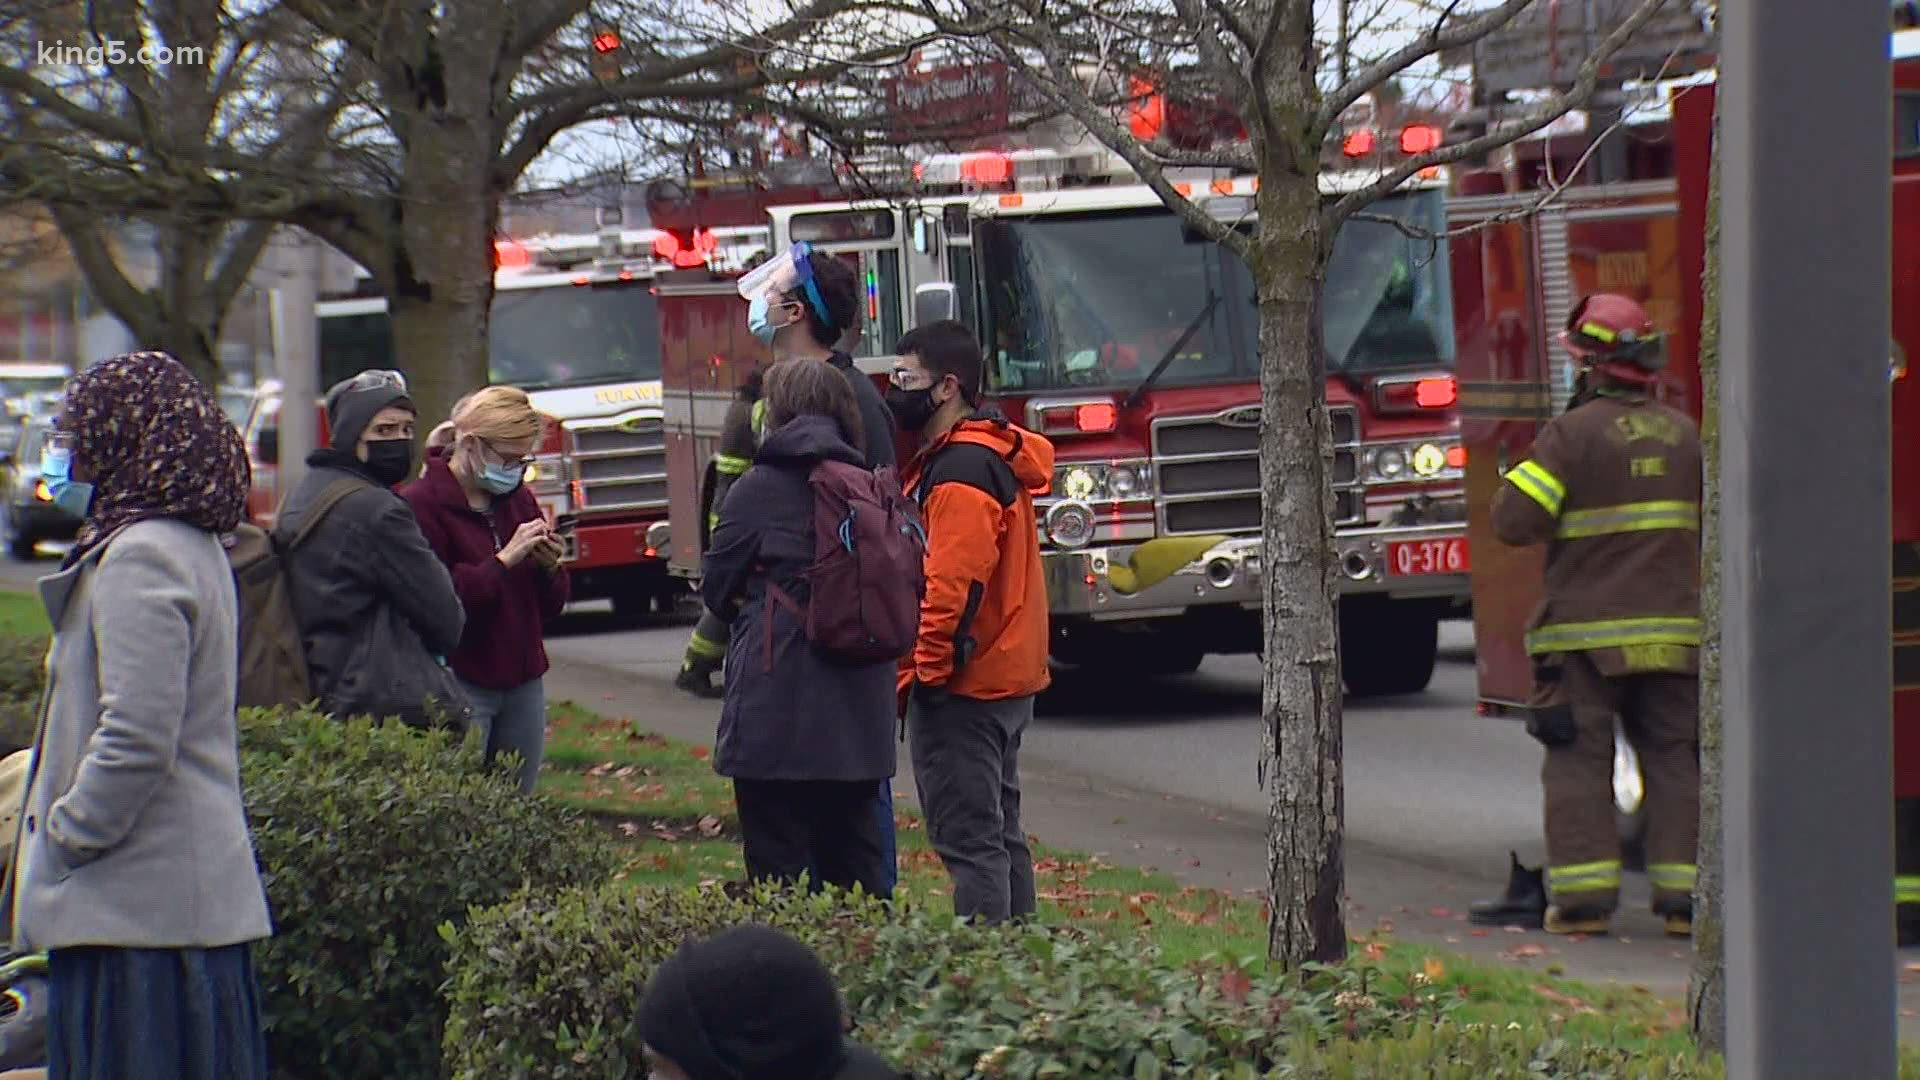 A 46-year-old man staying at a hotel-turned-homeless shelter in Renton was arrested after a hotel room caught fire.